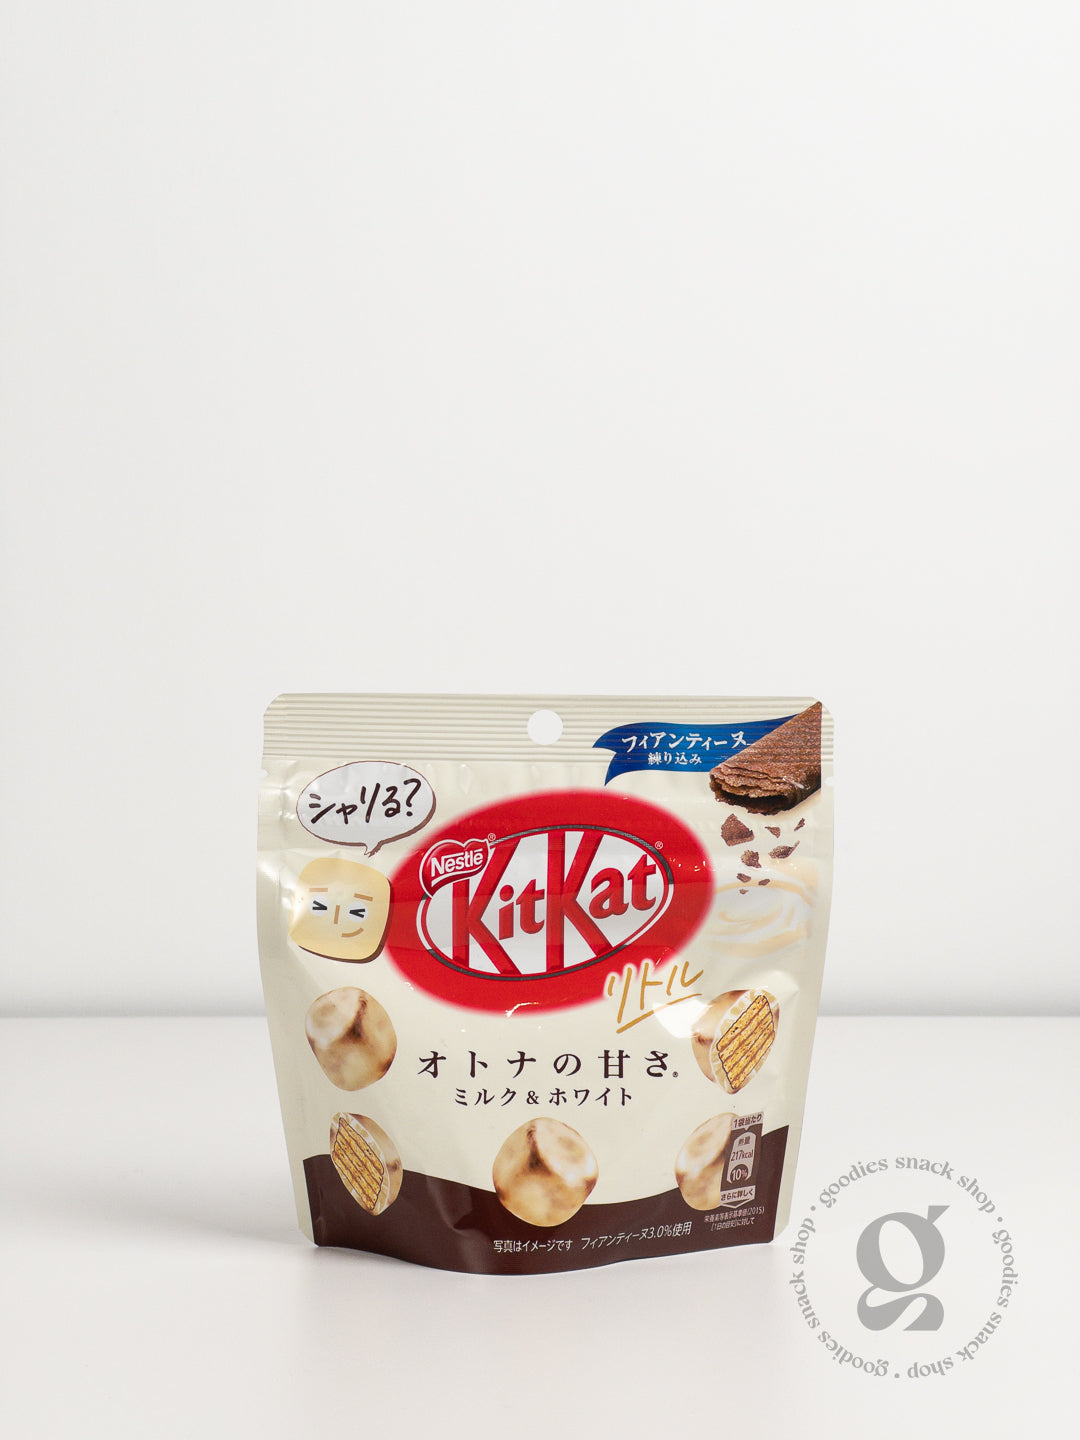 KitKat - Biscuits in White Chocolate - Japan